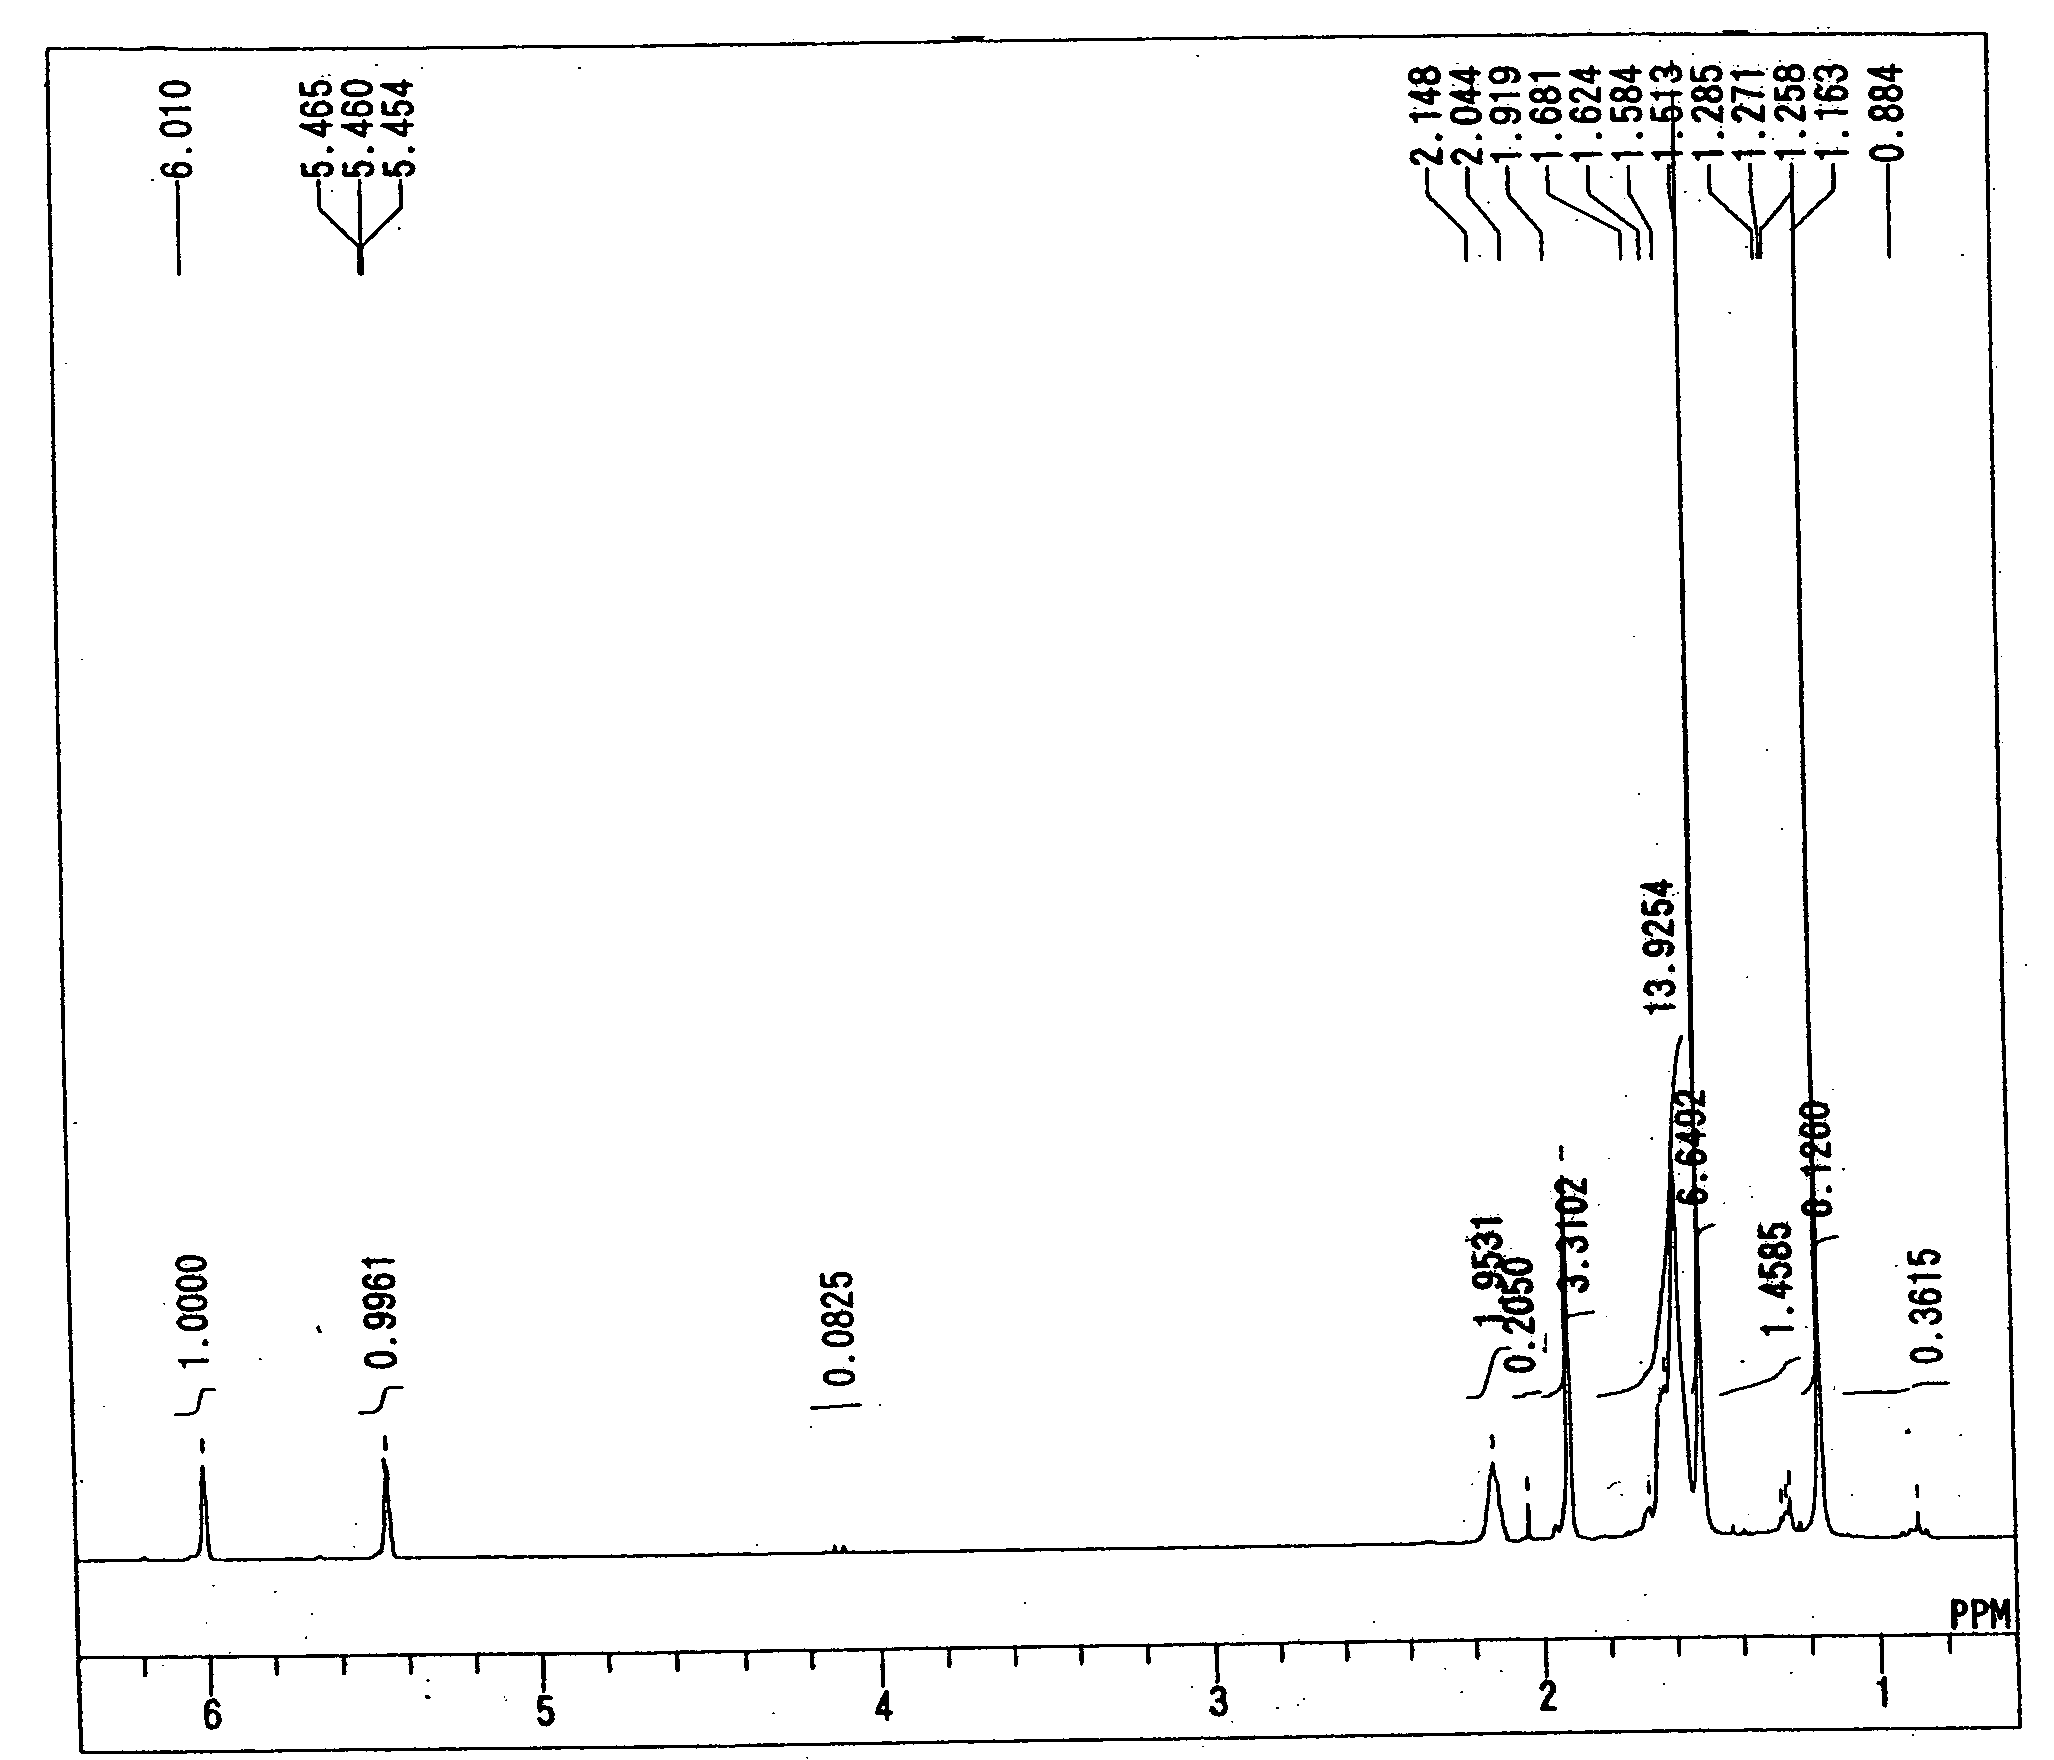 Adamantane derivatives and resin compositions using the same as raw material